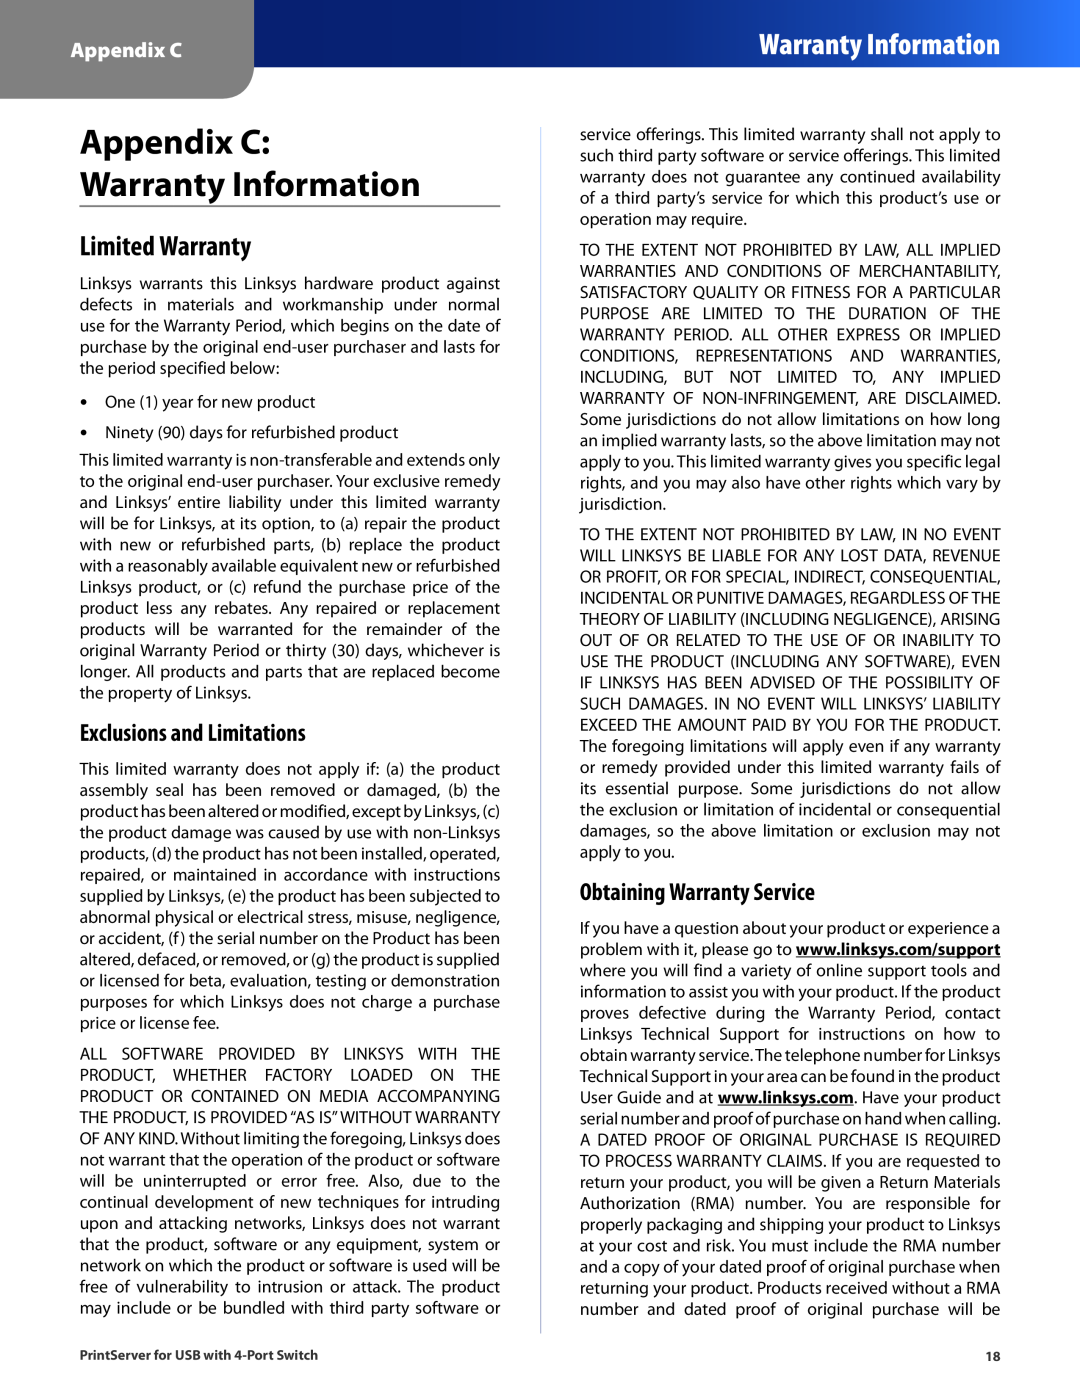 Cisco Systems PSUS4 manual Appendix C Warranty Information, Limited Warranty, Exclusions and Limitations 